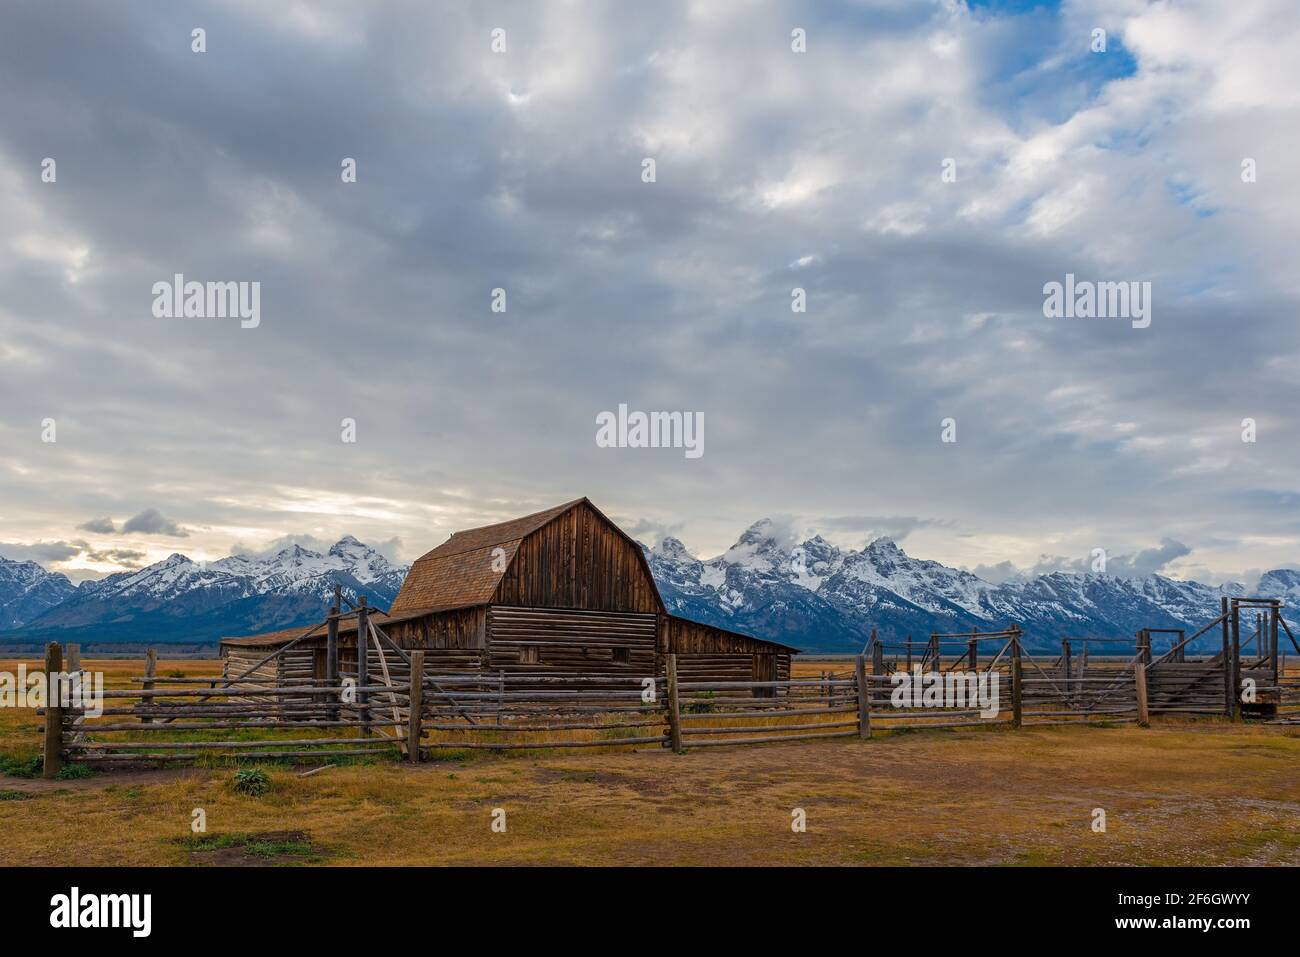 T. A. Moulton barn at sunset and Grand Teton range with snow in autumn, Grand Teton national park, Wyoming, United States of America (USA). Stock Photo